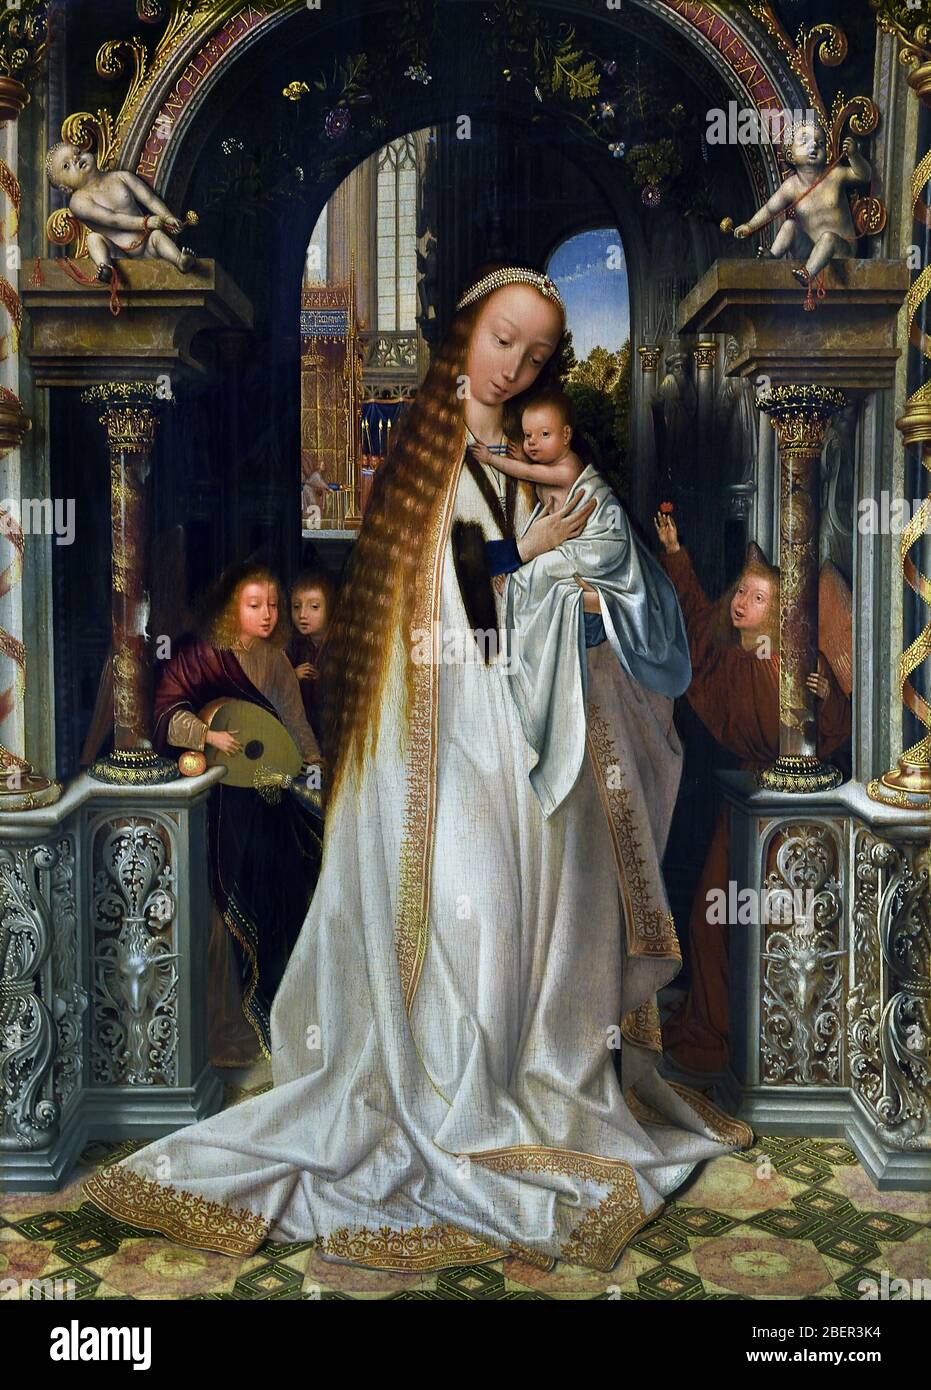 Virgin and Child Surrounded by Angels 1500 by Quentin Massys METSYS -1466-1530  Belgian, Belgium, Flemish, Stock Photo